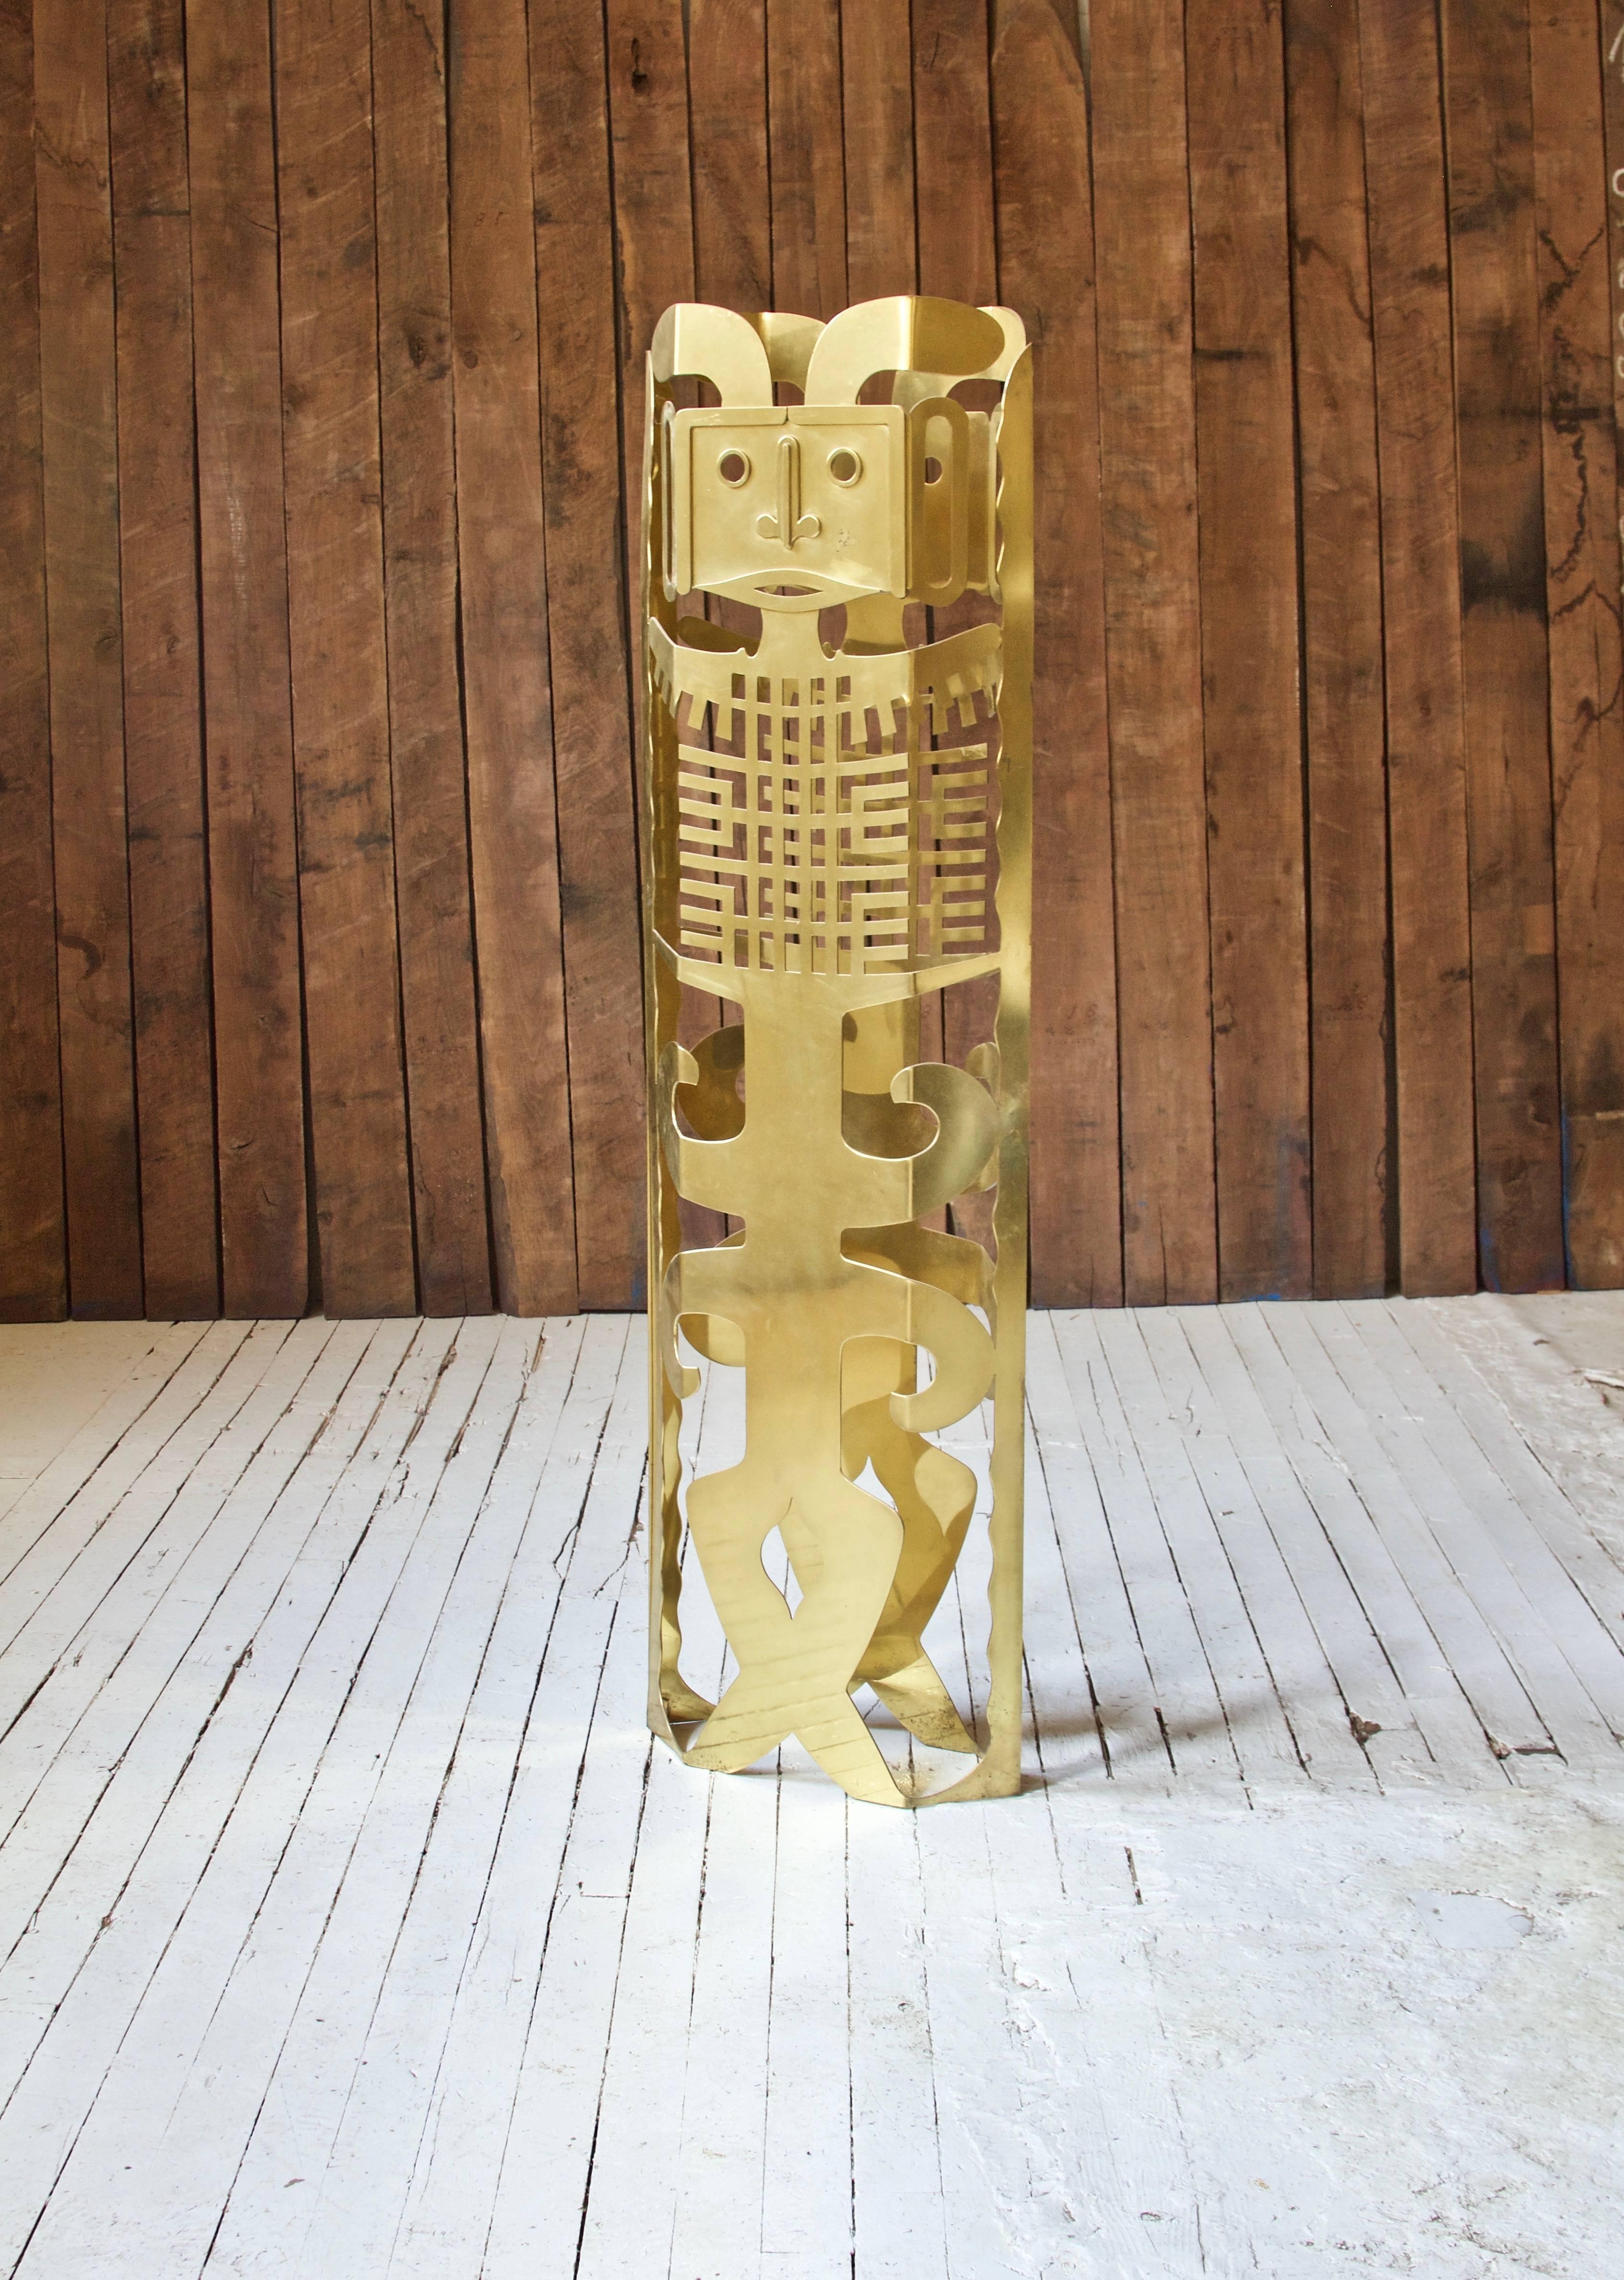 Impressive TOTEM sculpture by renowned artist Robert Zeidman (1915-1996) in cut and polished solid brass. A unique figurative example of Zeidman's mostly abstract totemic metal sculpture; this piece draws inspiration from as it's title suggests the